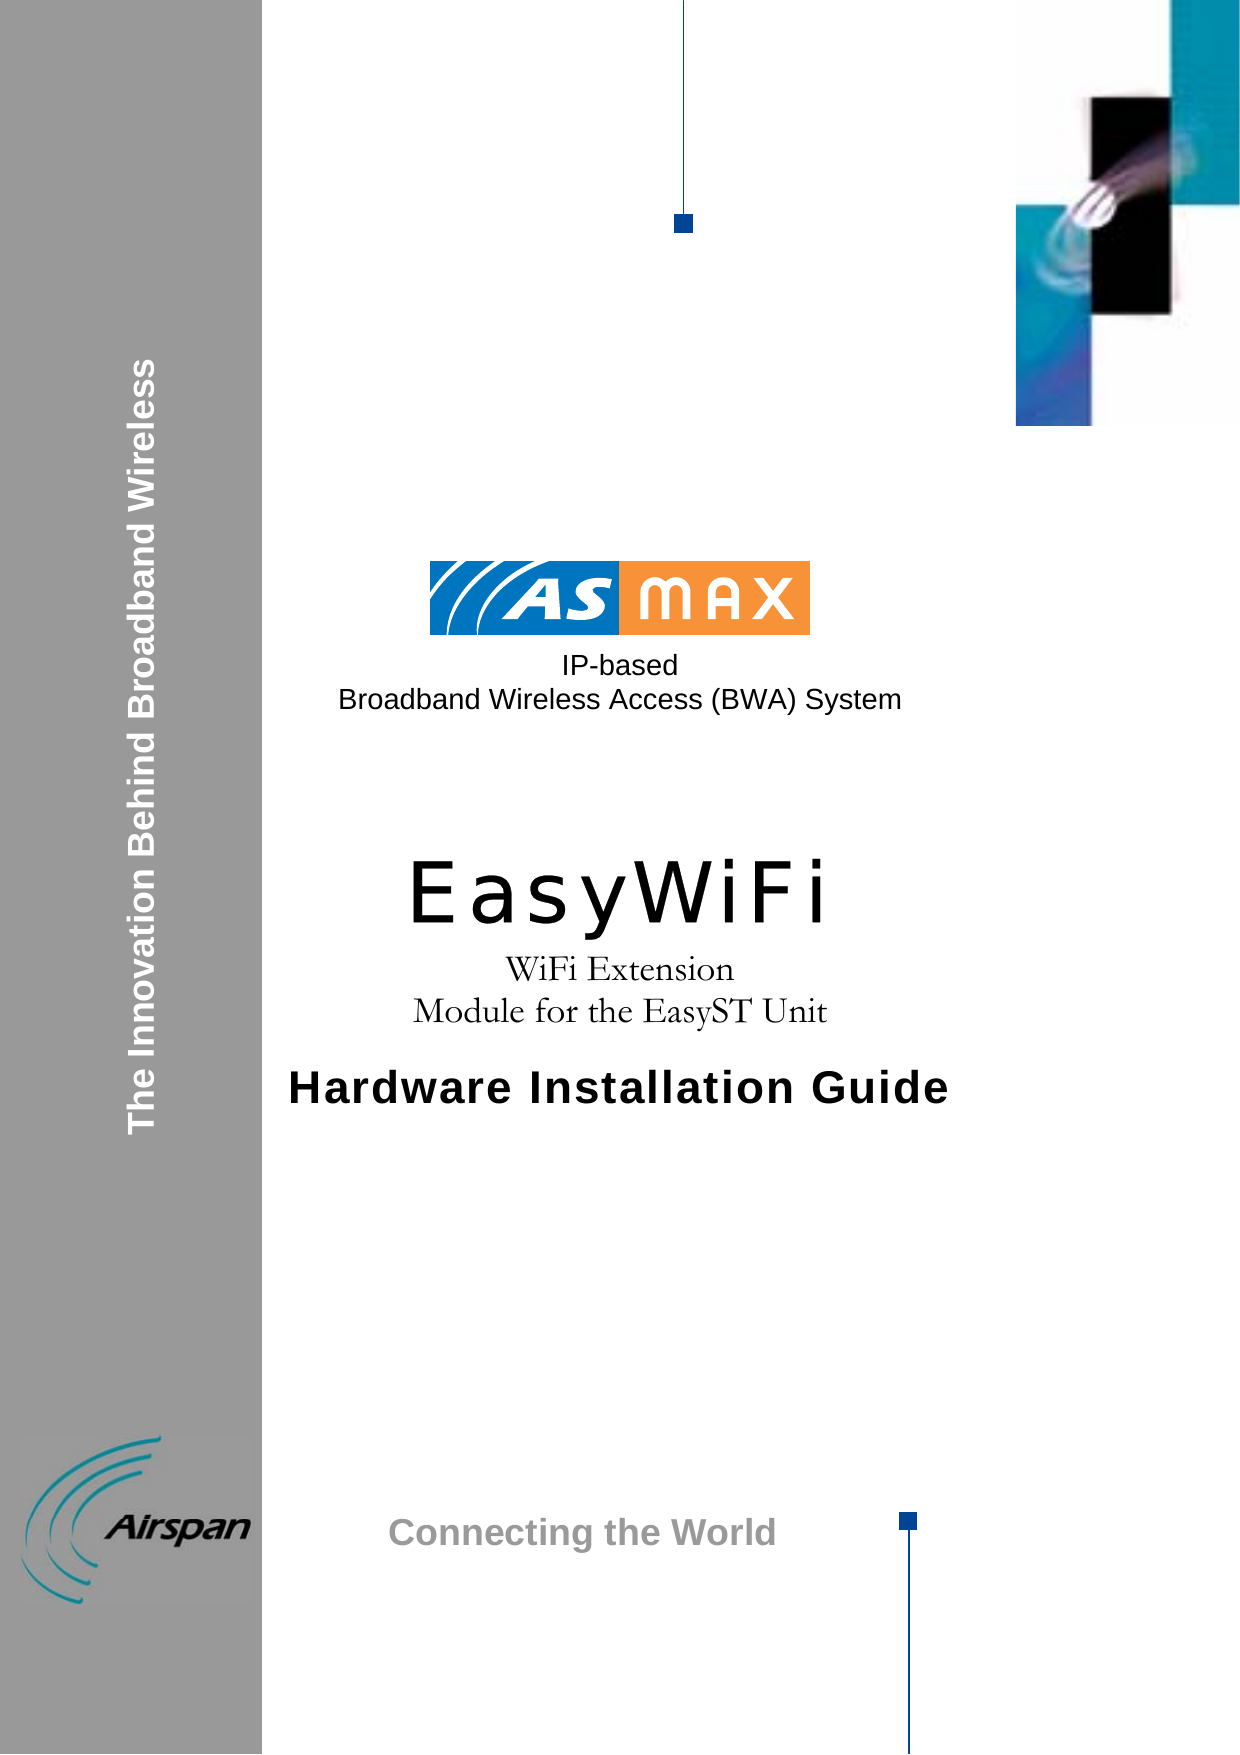             IP-based  Broadband Wireless Access (BWA) System     EasyWiFi WiFi Extension  Module for the EasyST Unit  Hardware Installation Guide                                    The Innovation Behind Broadband Wireless Connecting the World  